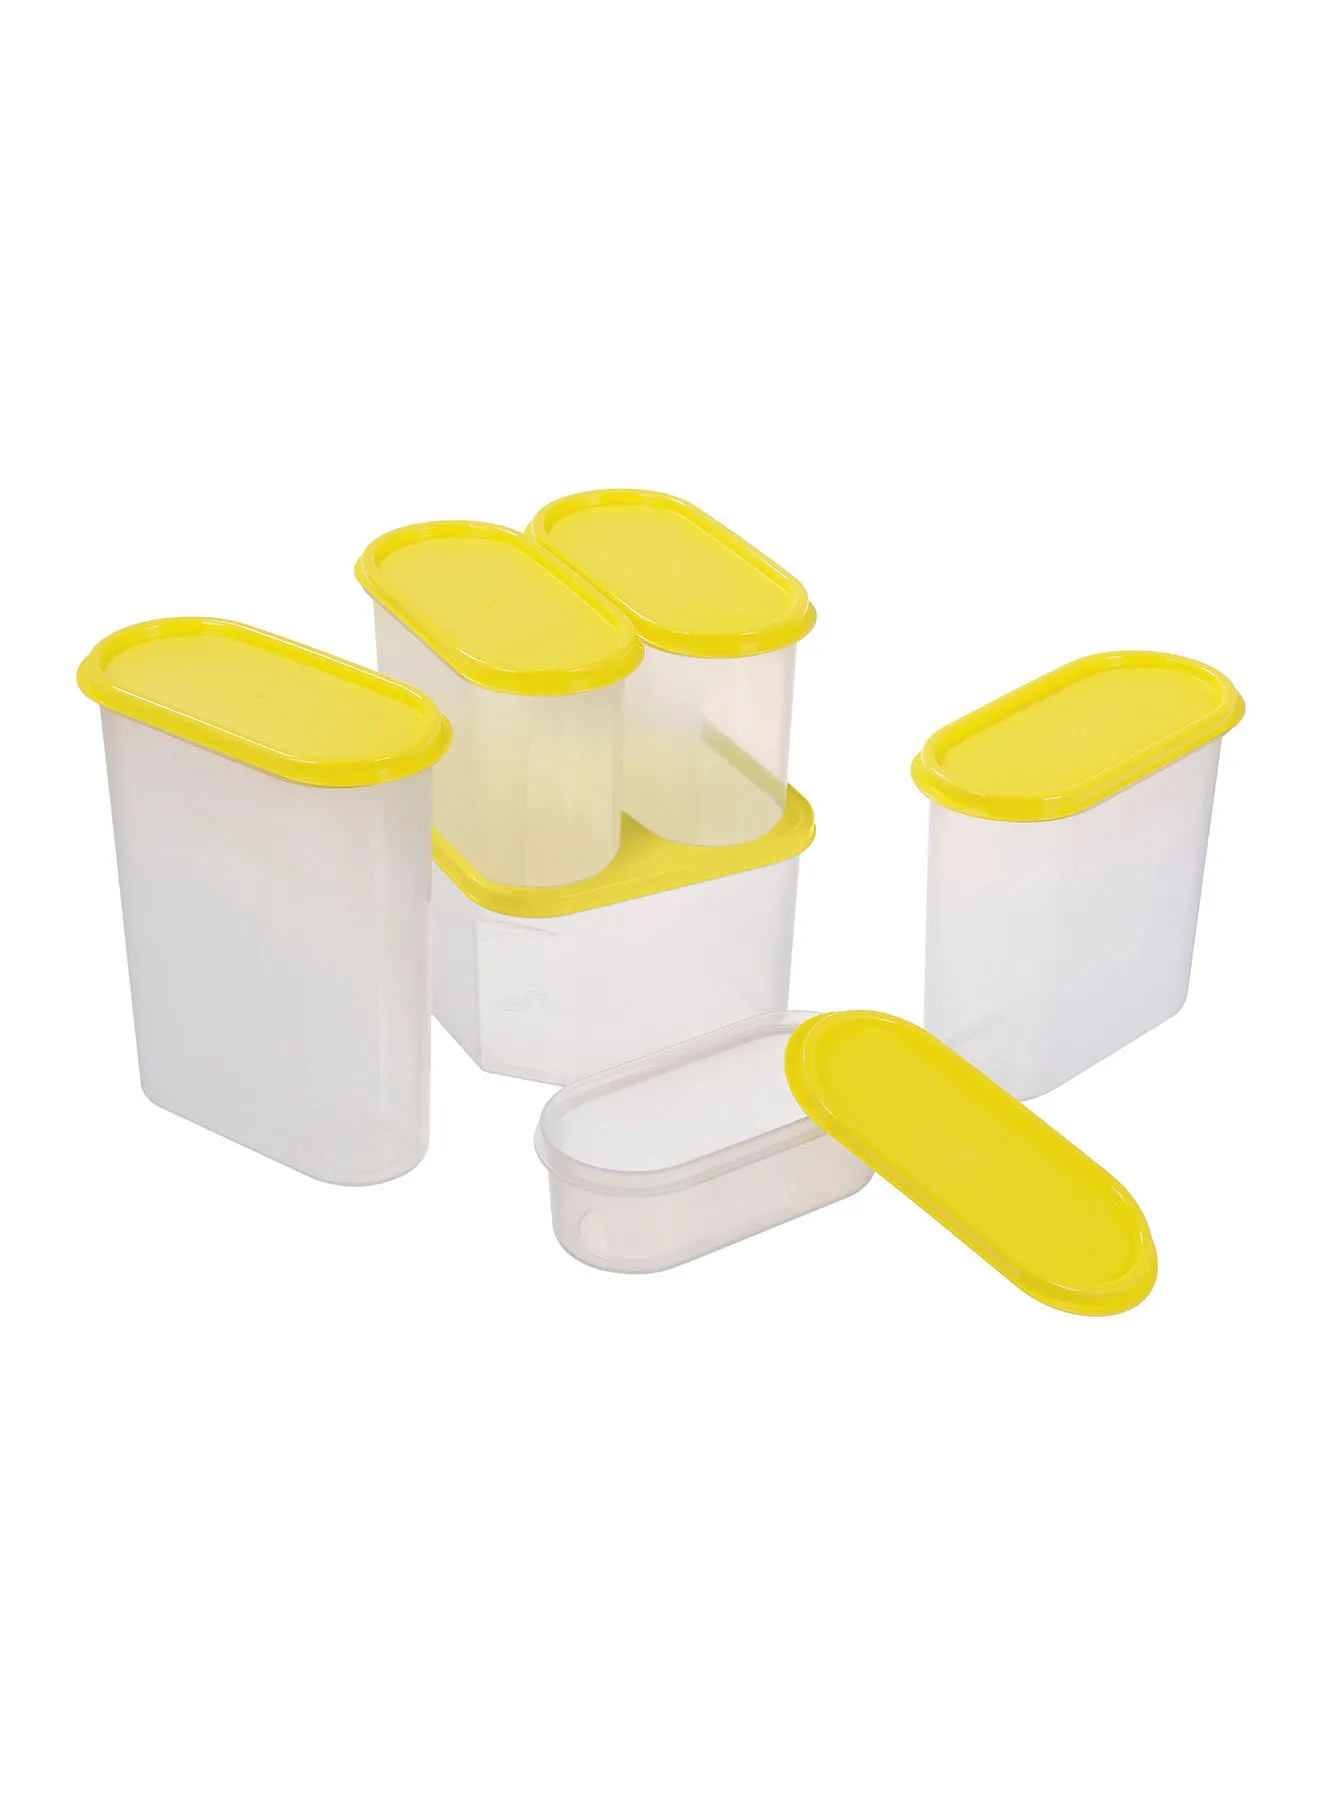 Amal 6 Piece Food Storage Container Set - Food Storage Box - Storage Boxes - Kitchen Cabinet Organizers - Food Container - Clear/Yellow